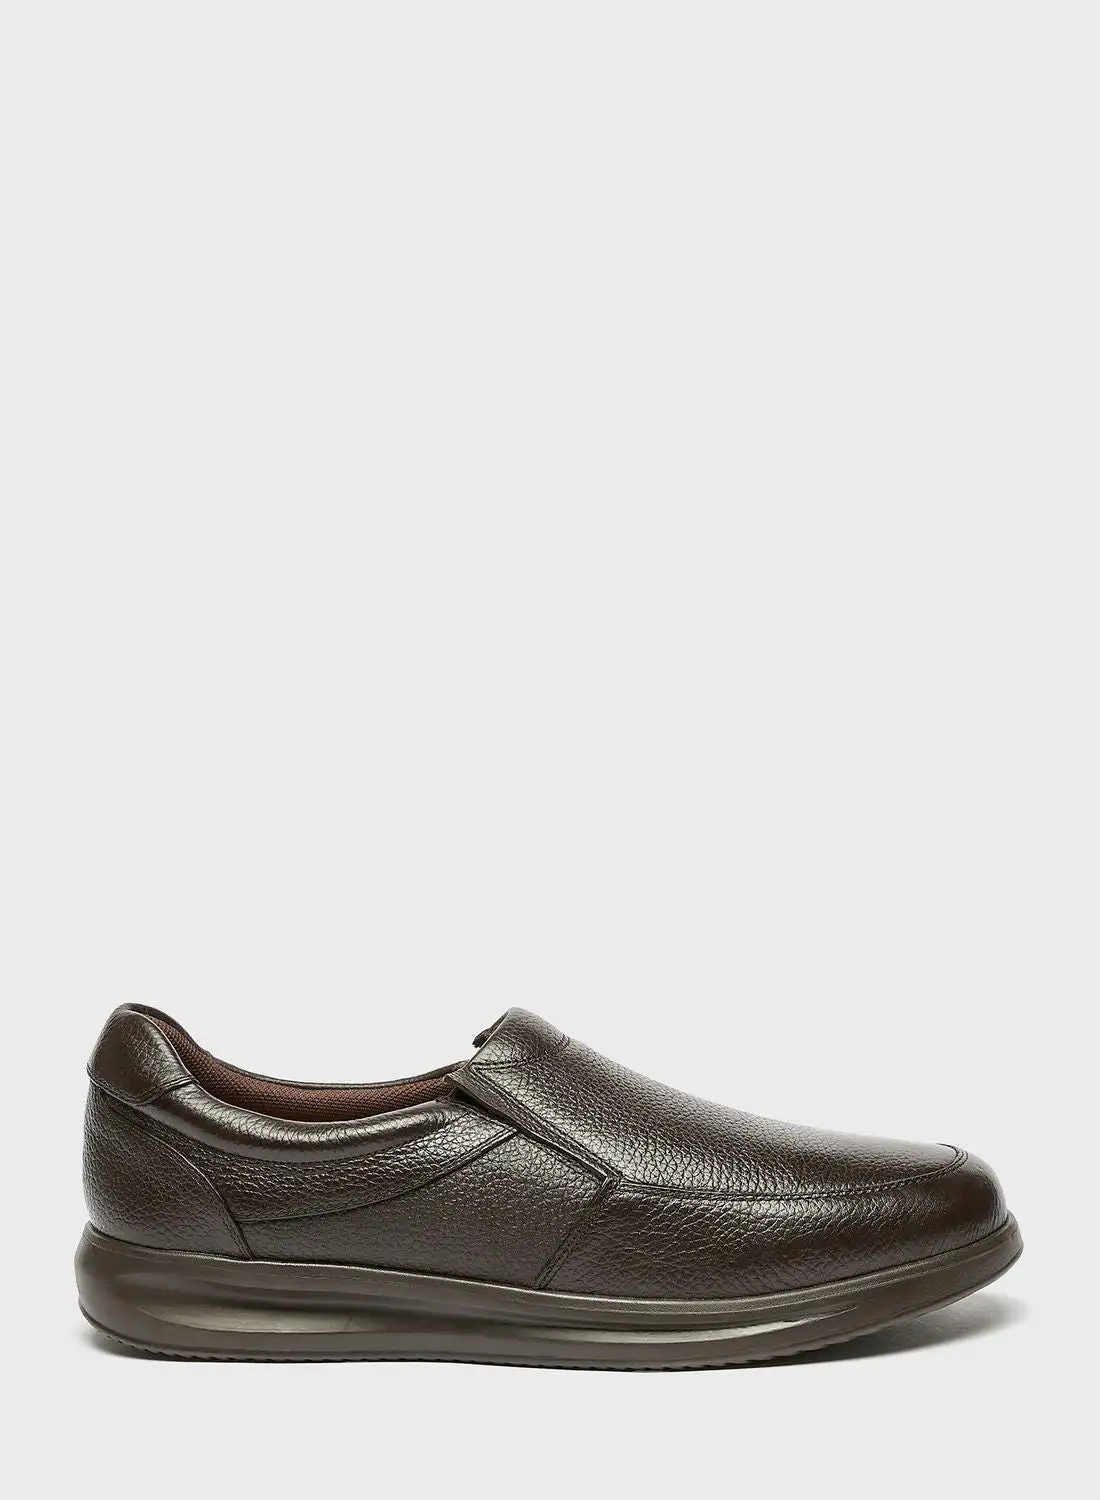 Le Confort Casual Slip On Shoes